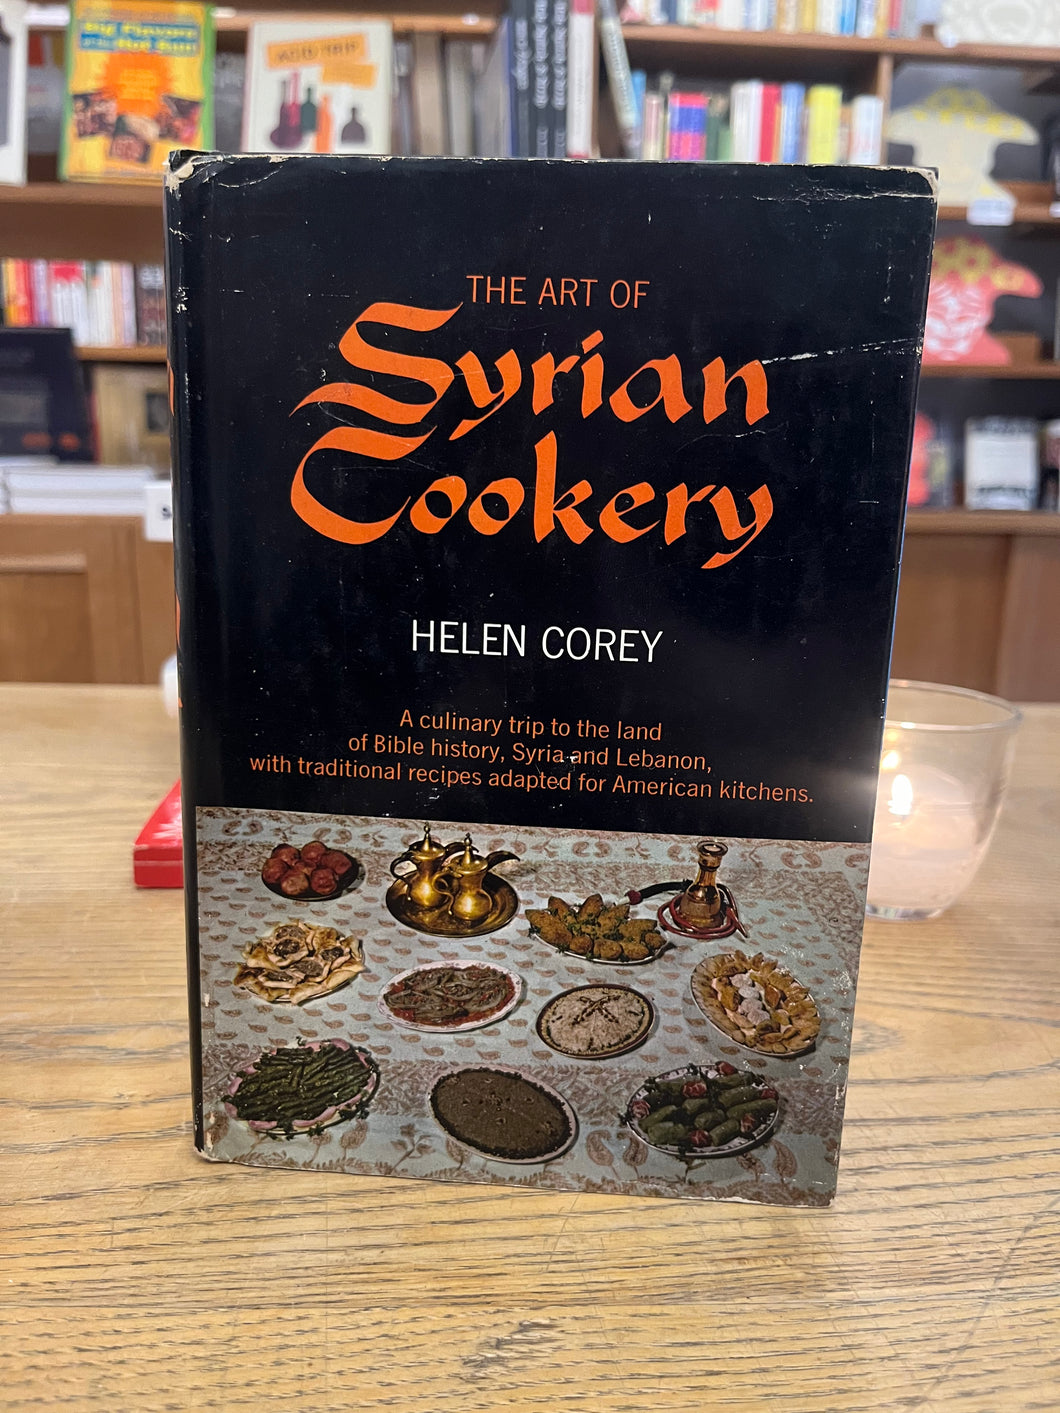 The Art of Syrian Cookery A Culinary Trip to the Land of Bible History,  Syria and Lebanon,  With Traditional Recipes Adapted for American  Kitchens by Helen Corey